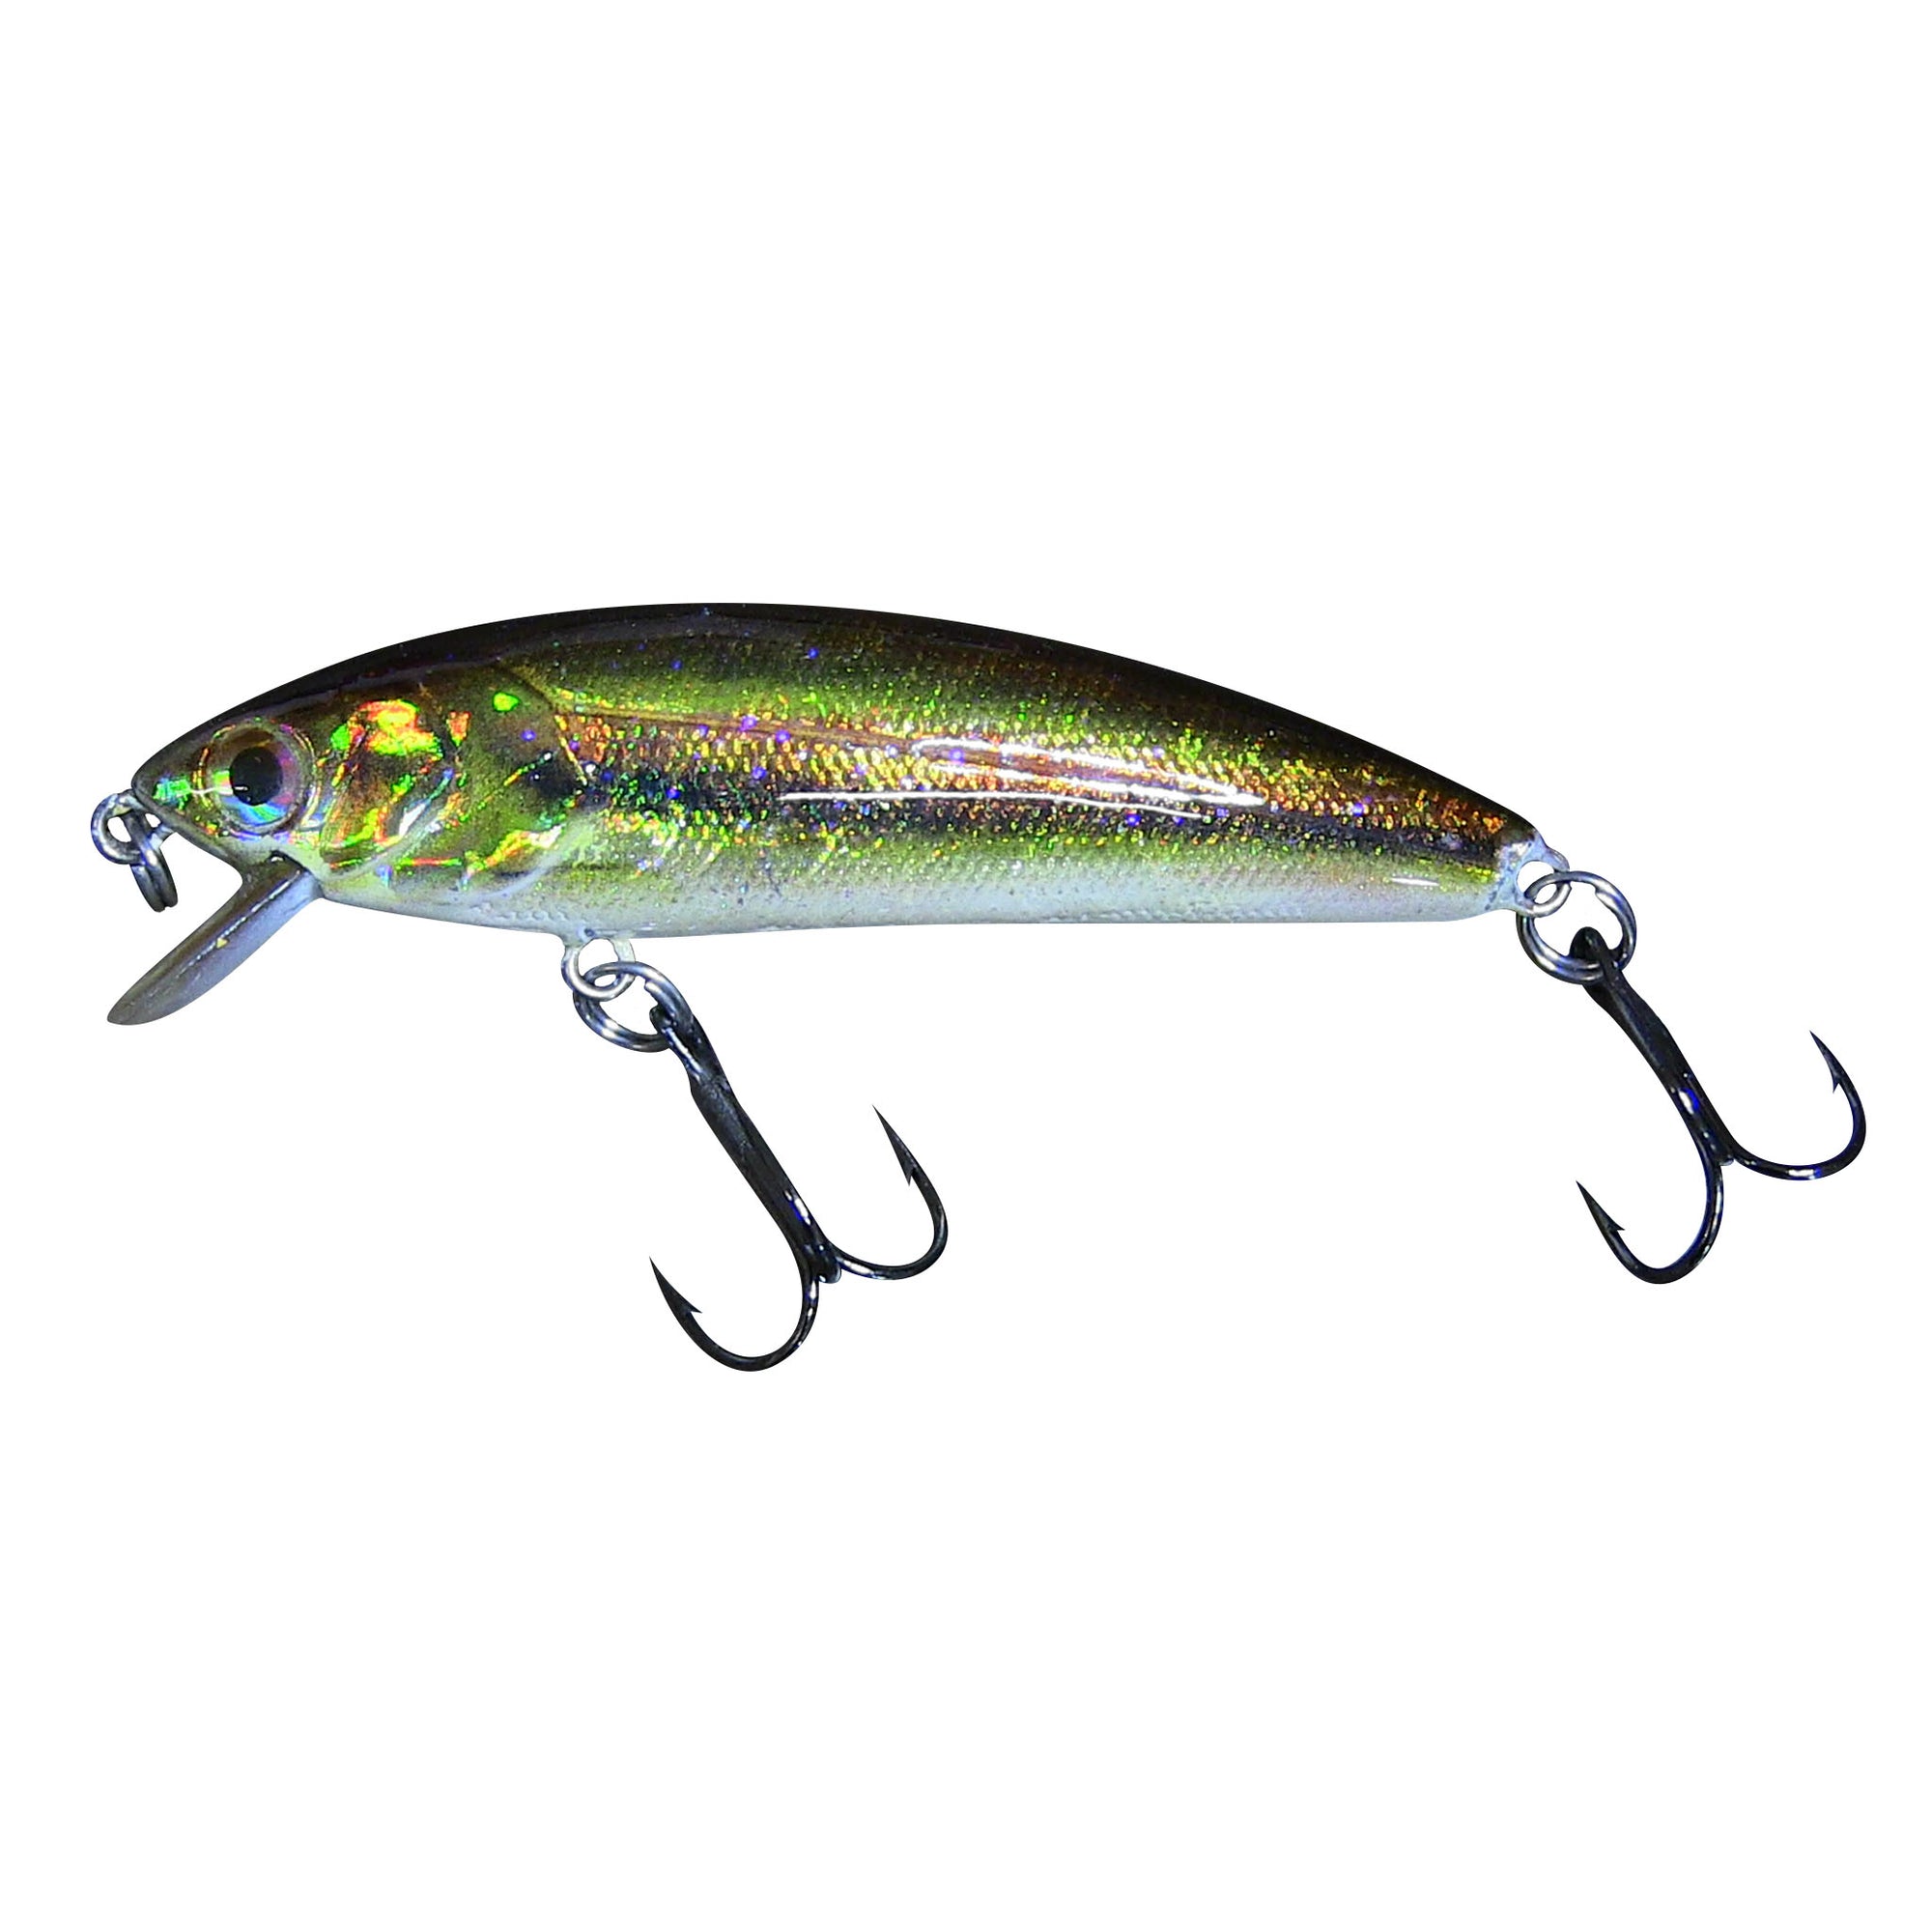 Dace Shallow Diver Live Bait Series, Fishing Lures Near Me